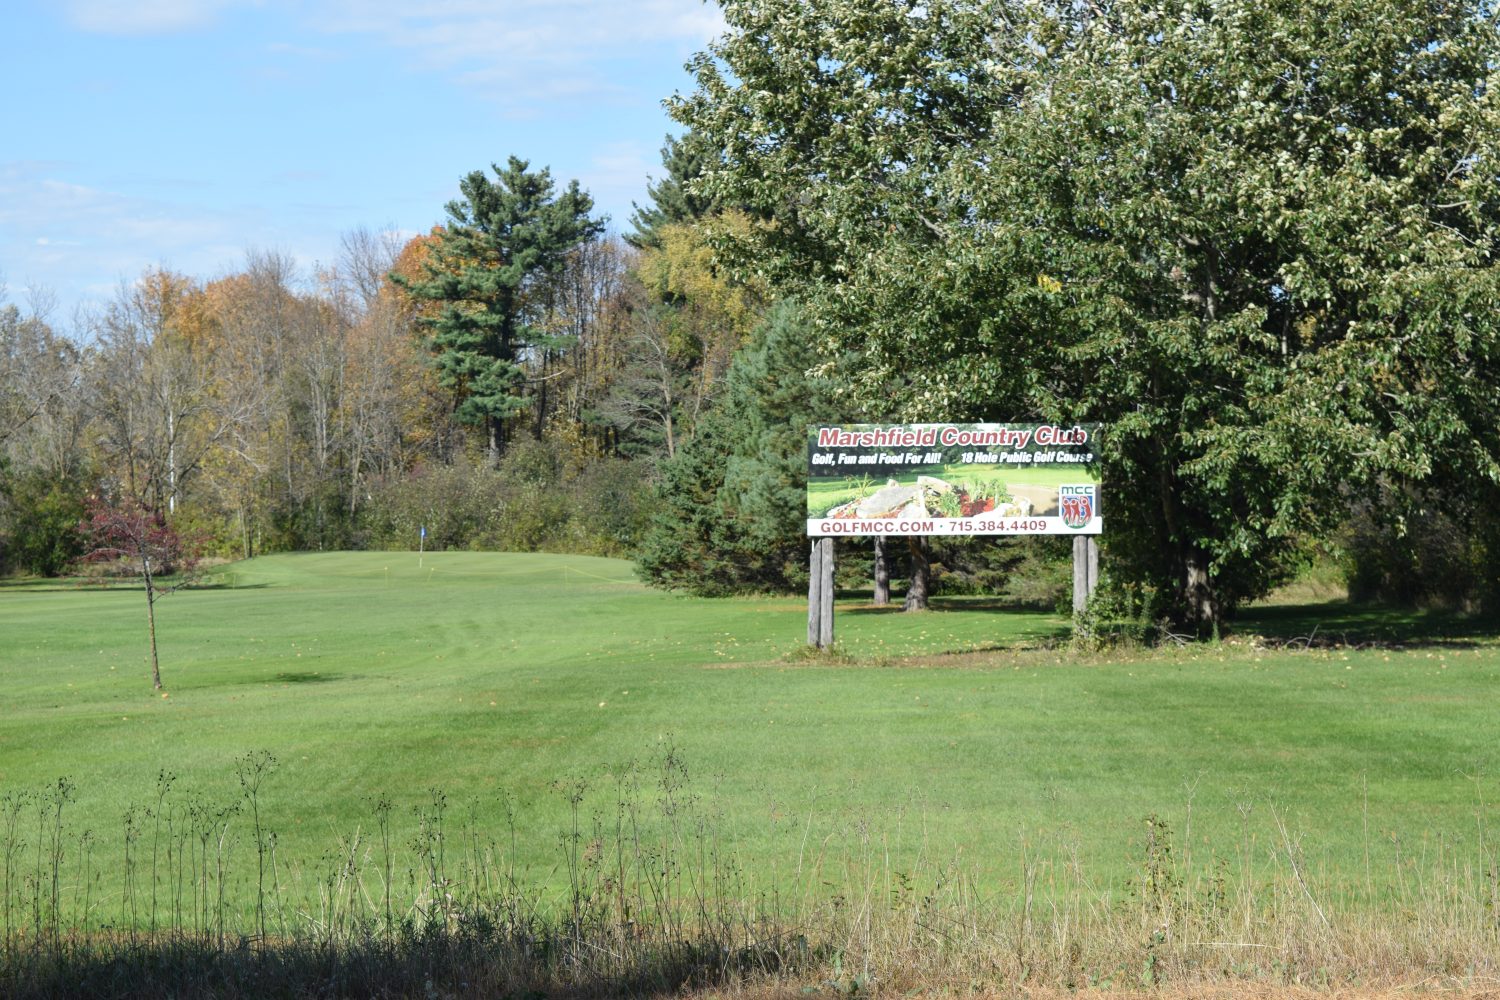 Marshfield Country Club has been sold to Jesse Jacobson, owner of Woodfield Inn & Suites.